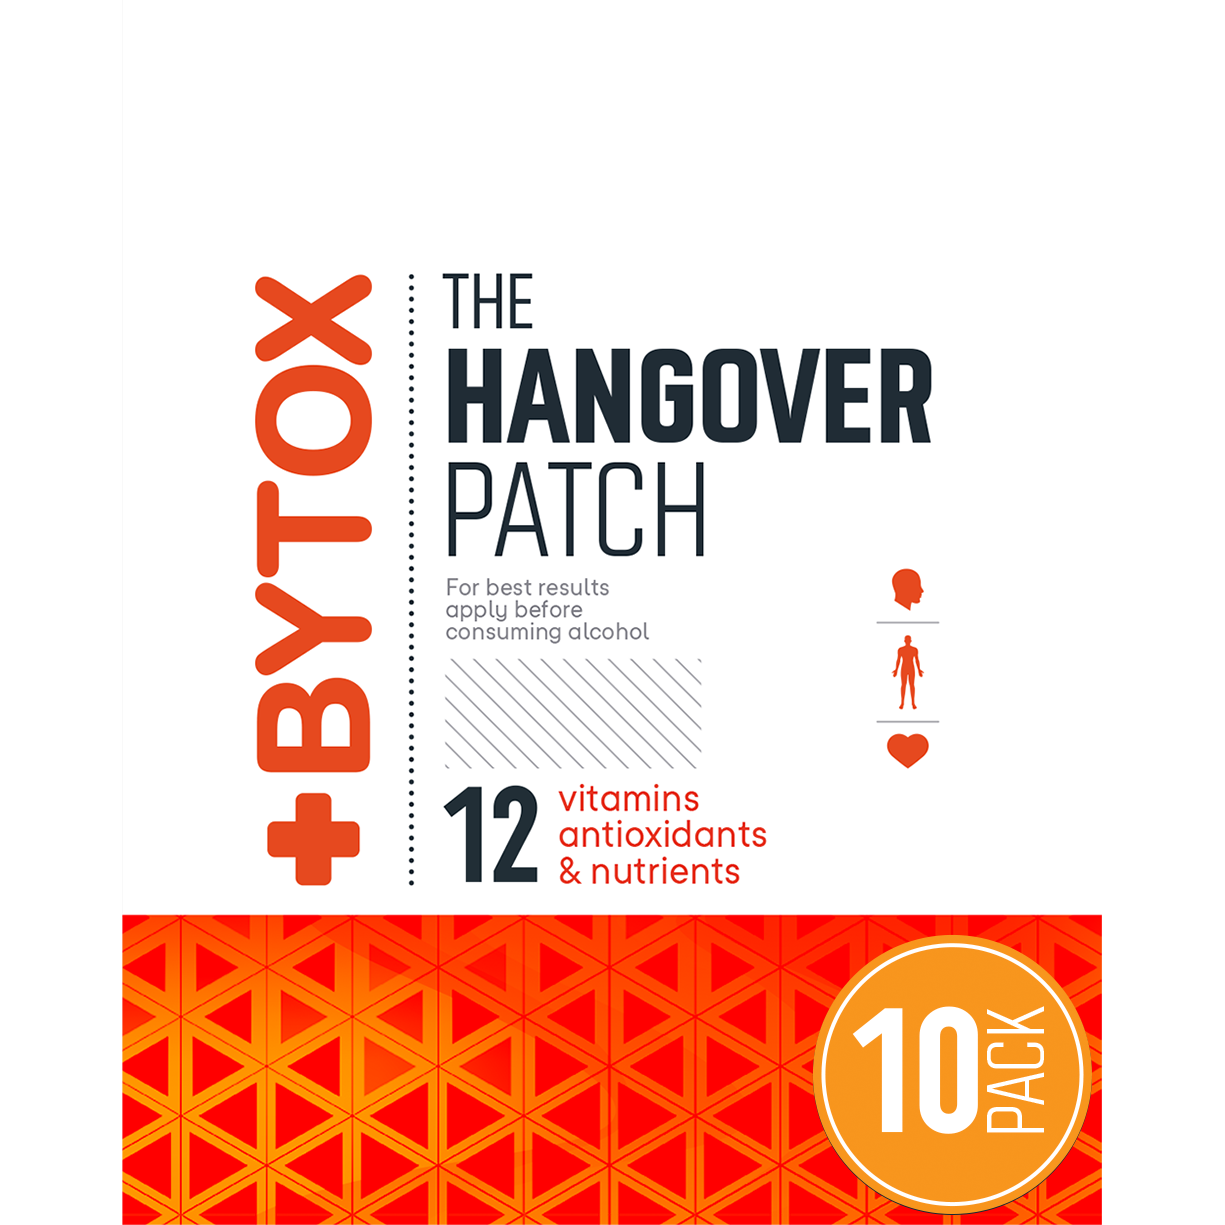 This Hangover Prevention Patch Really Works